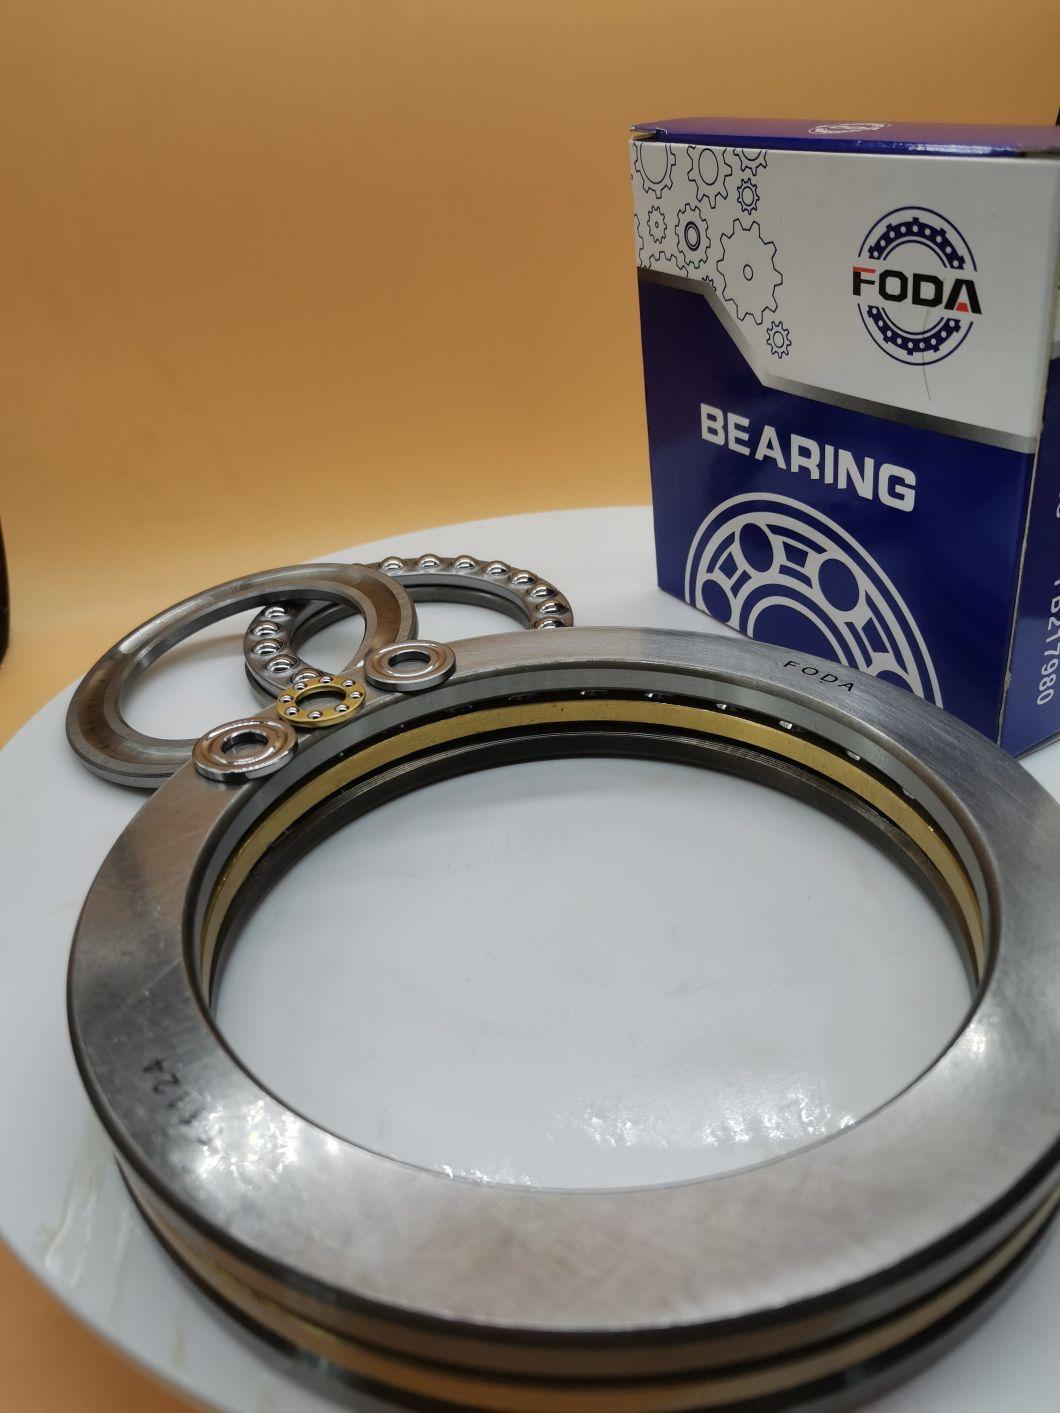 Unidirectional Thrust Ball Bearings/Low Speed Reducer/Foda High Quality Bearings Instead of Koyo Bearings/Thrust Ball Bearings of 51411